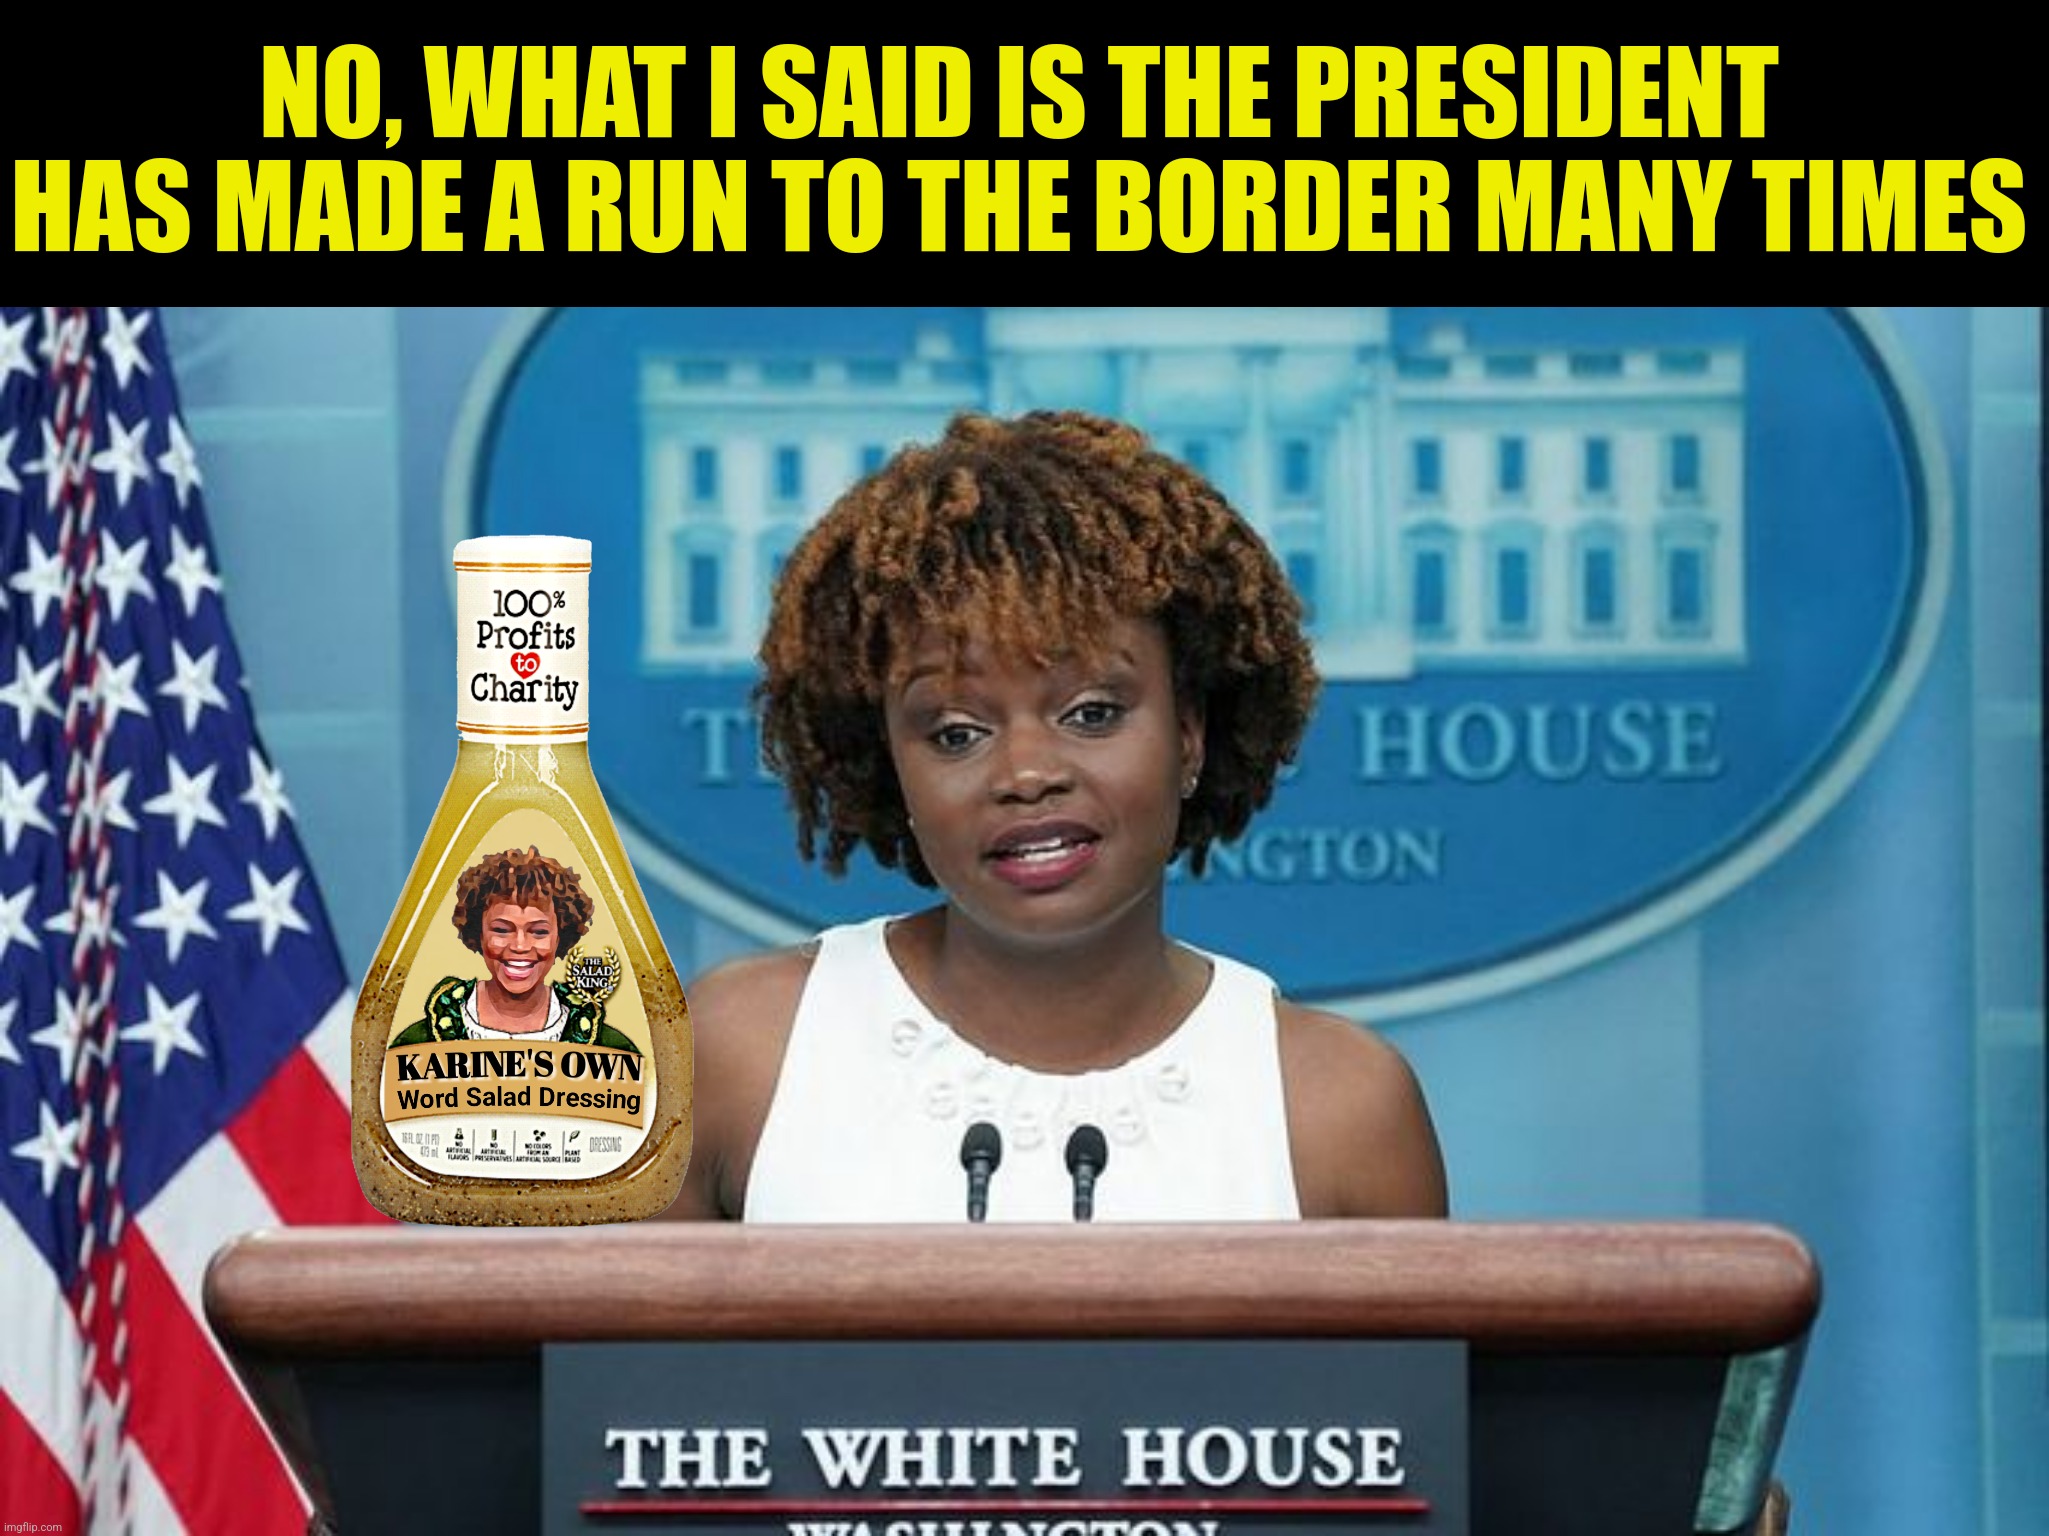 NO, WHAT I SAID IS THE PRESIDENT HAS MADE A RUN TO THE BORDER MANY TIMES | made w/ Imgflip meme maker